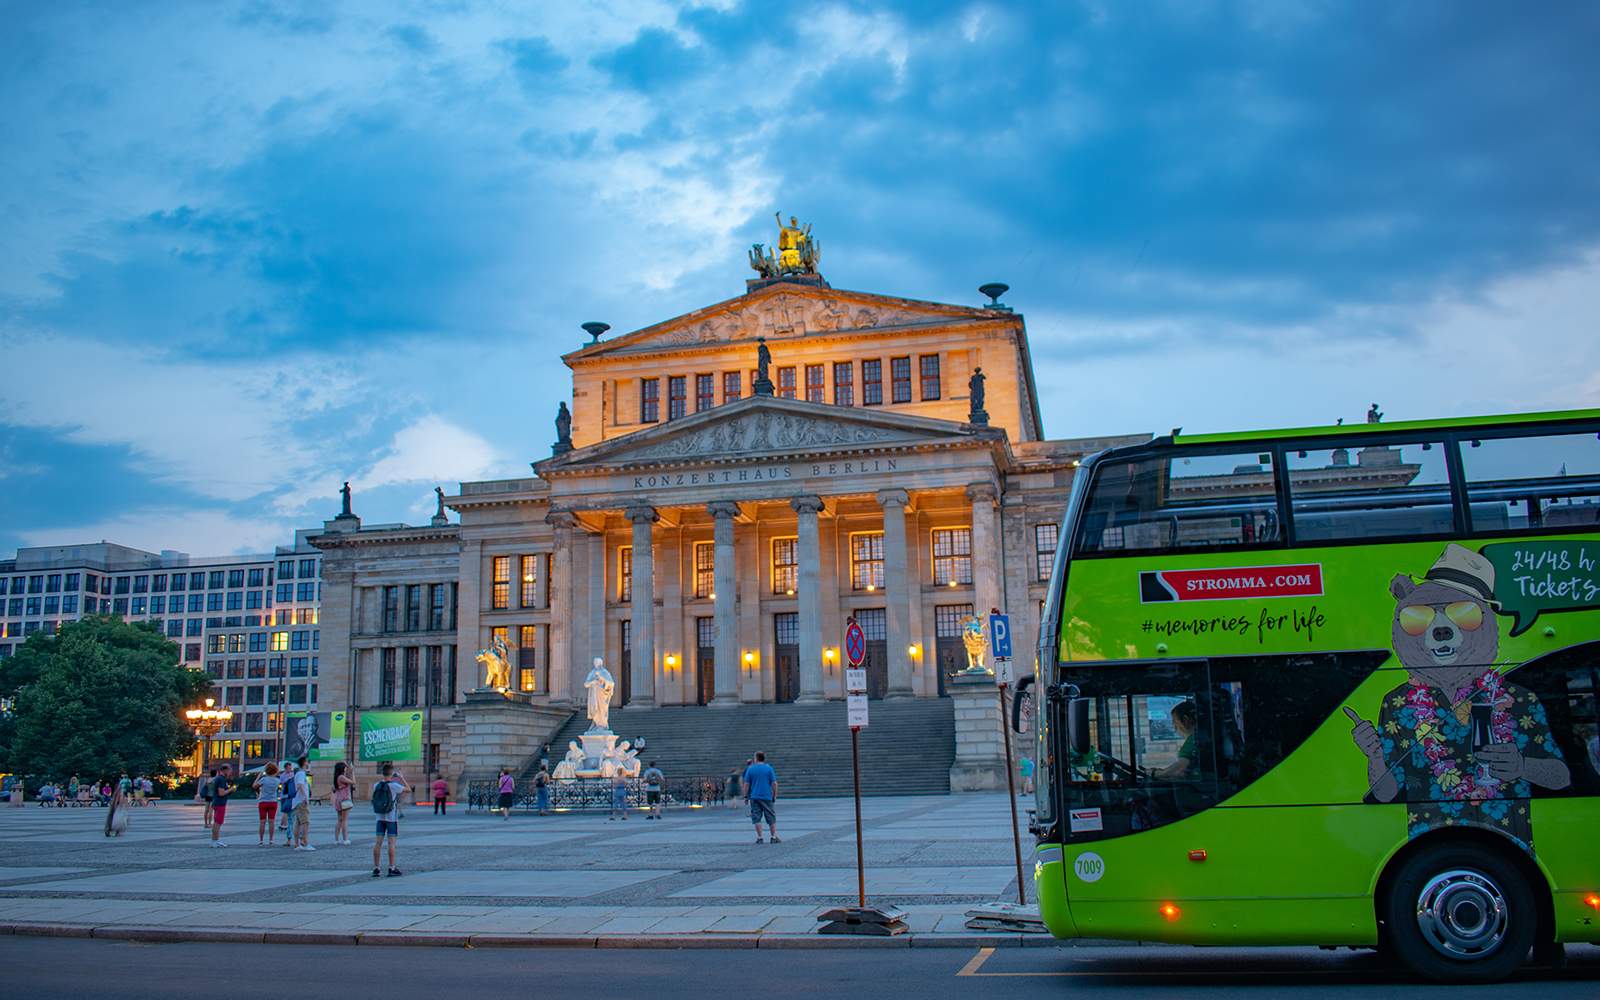 Image of Evening Tour by Bus in Berlin